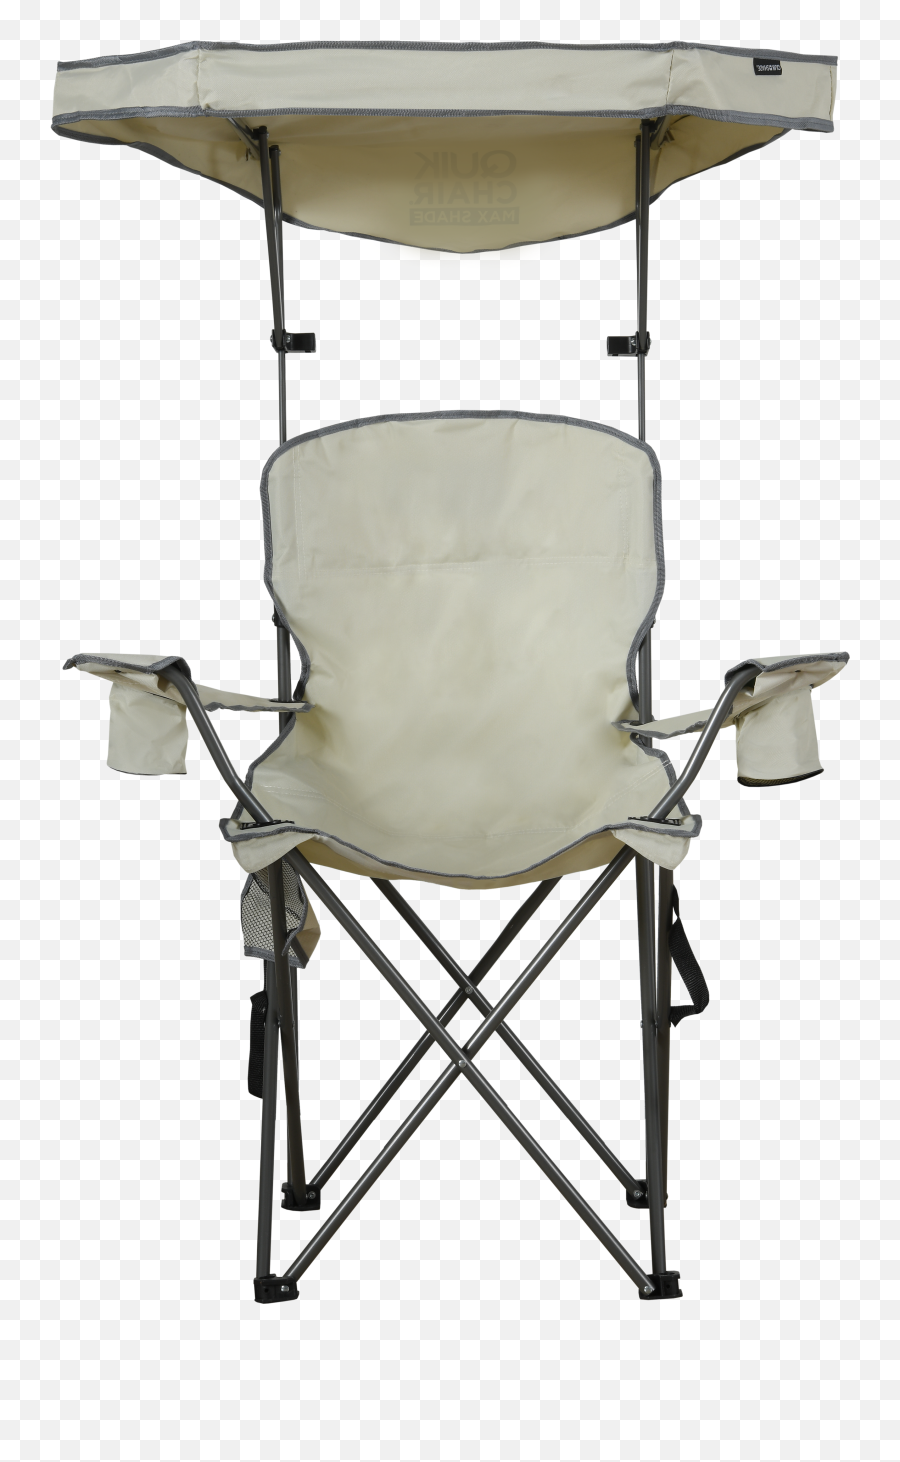 Quik Chair Max Shade Adjustable Folding - Chair Emoji,Emojis Lounging In A Chaie With A Santa Hat Eating Ice Cream Cones